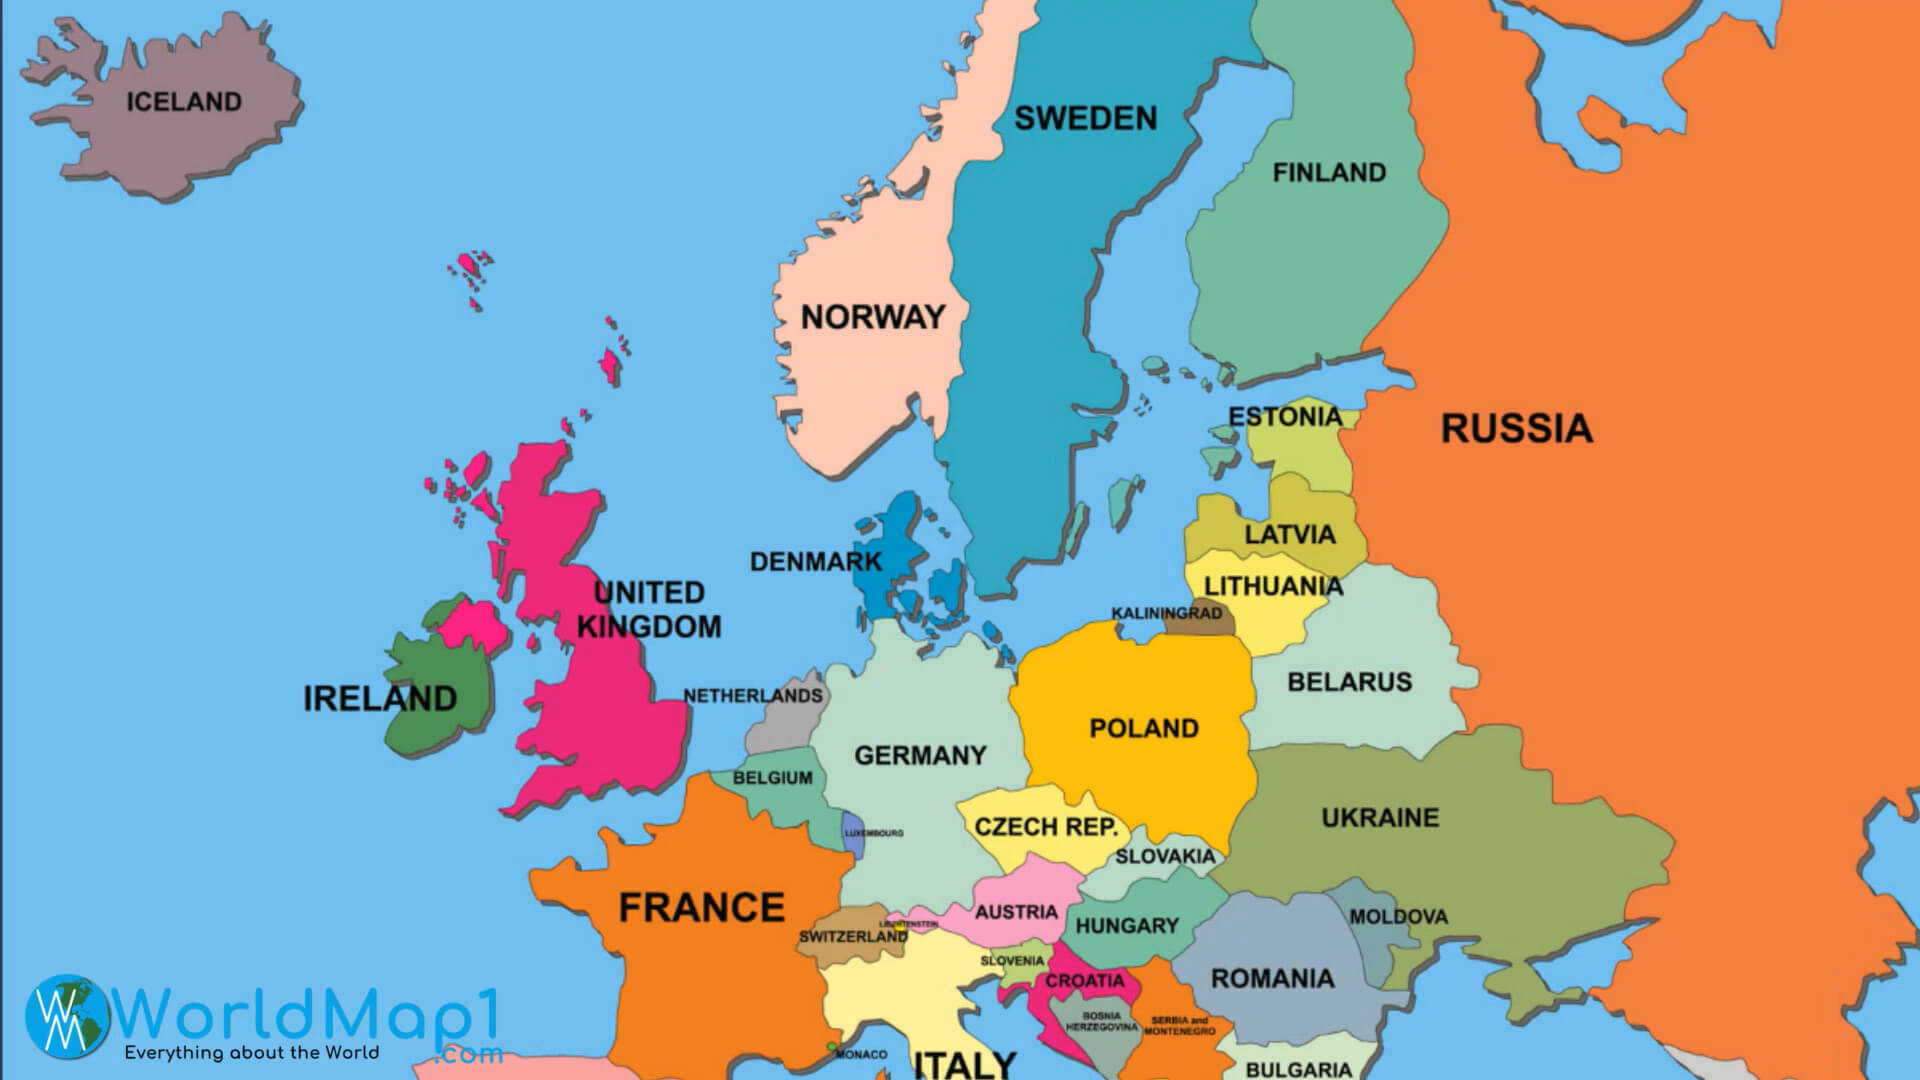 Latvia and Baltic Countries Map with Russia Border